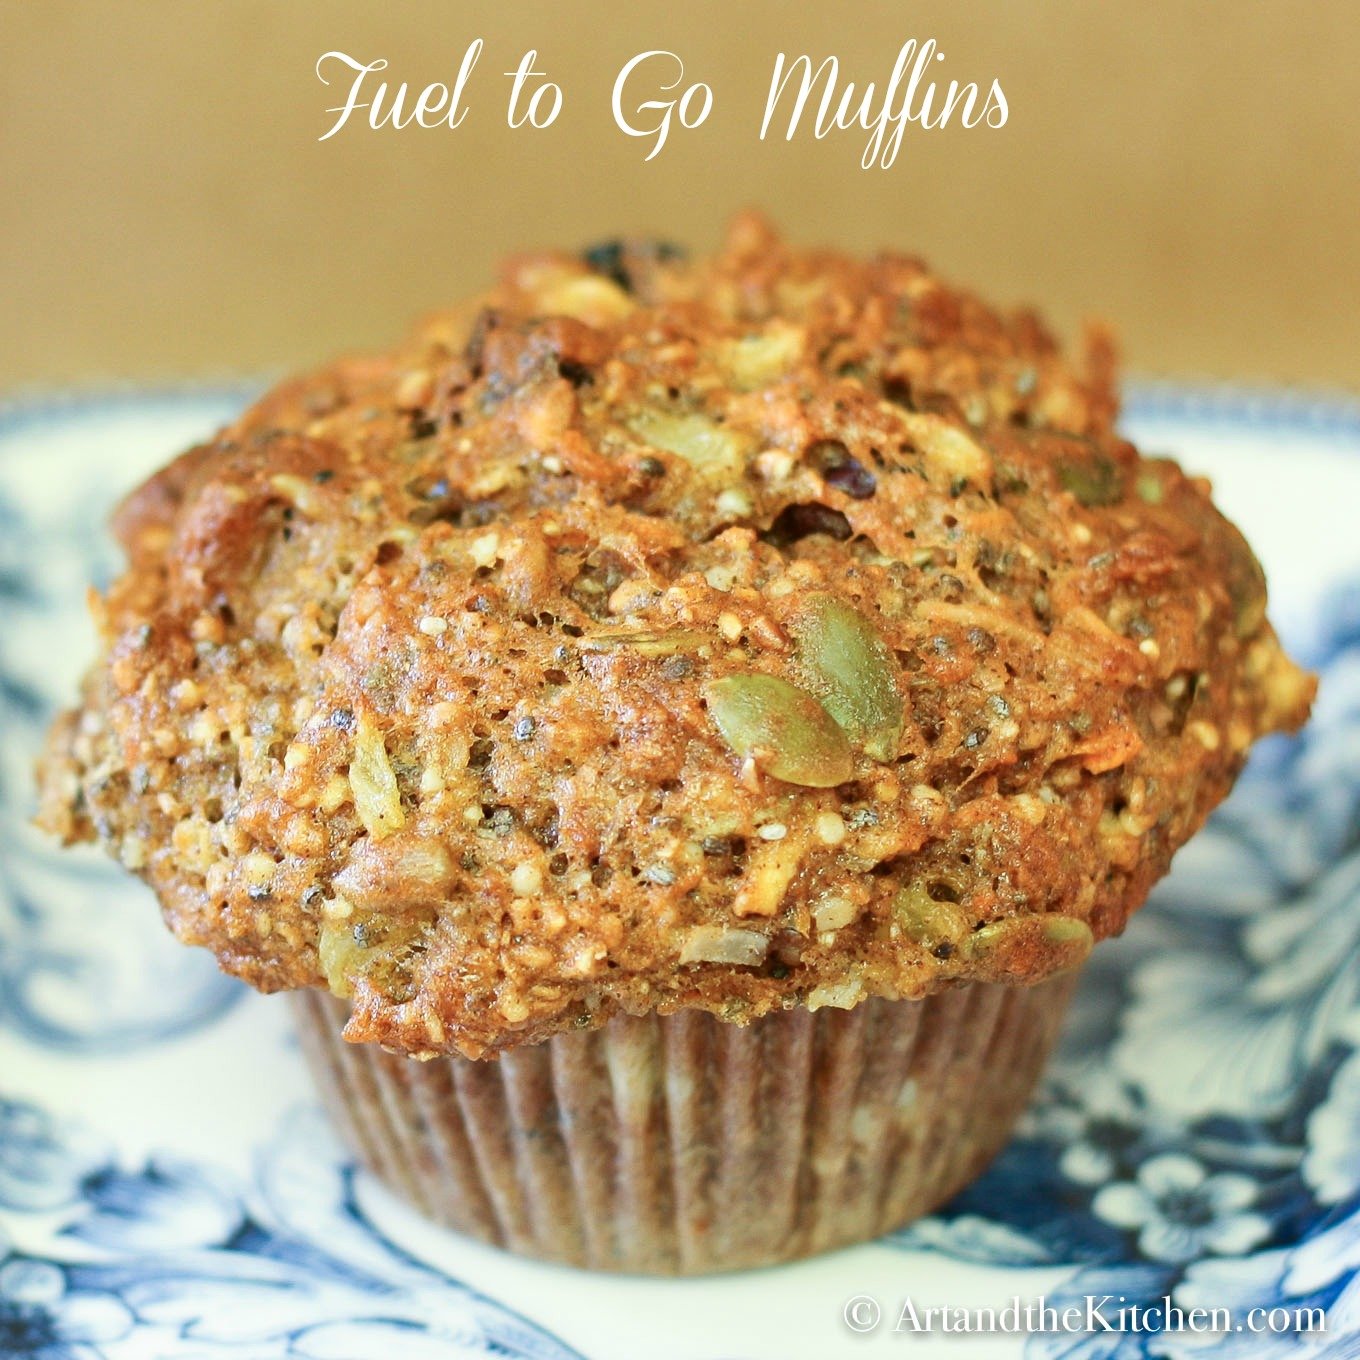 Healthy muffin with whole grains, dried fruit, pumpkin and sunflowers and more on blue plate.